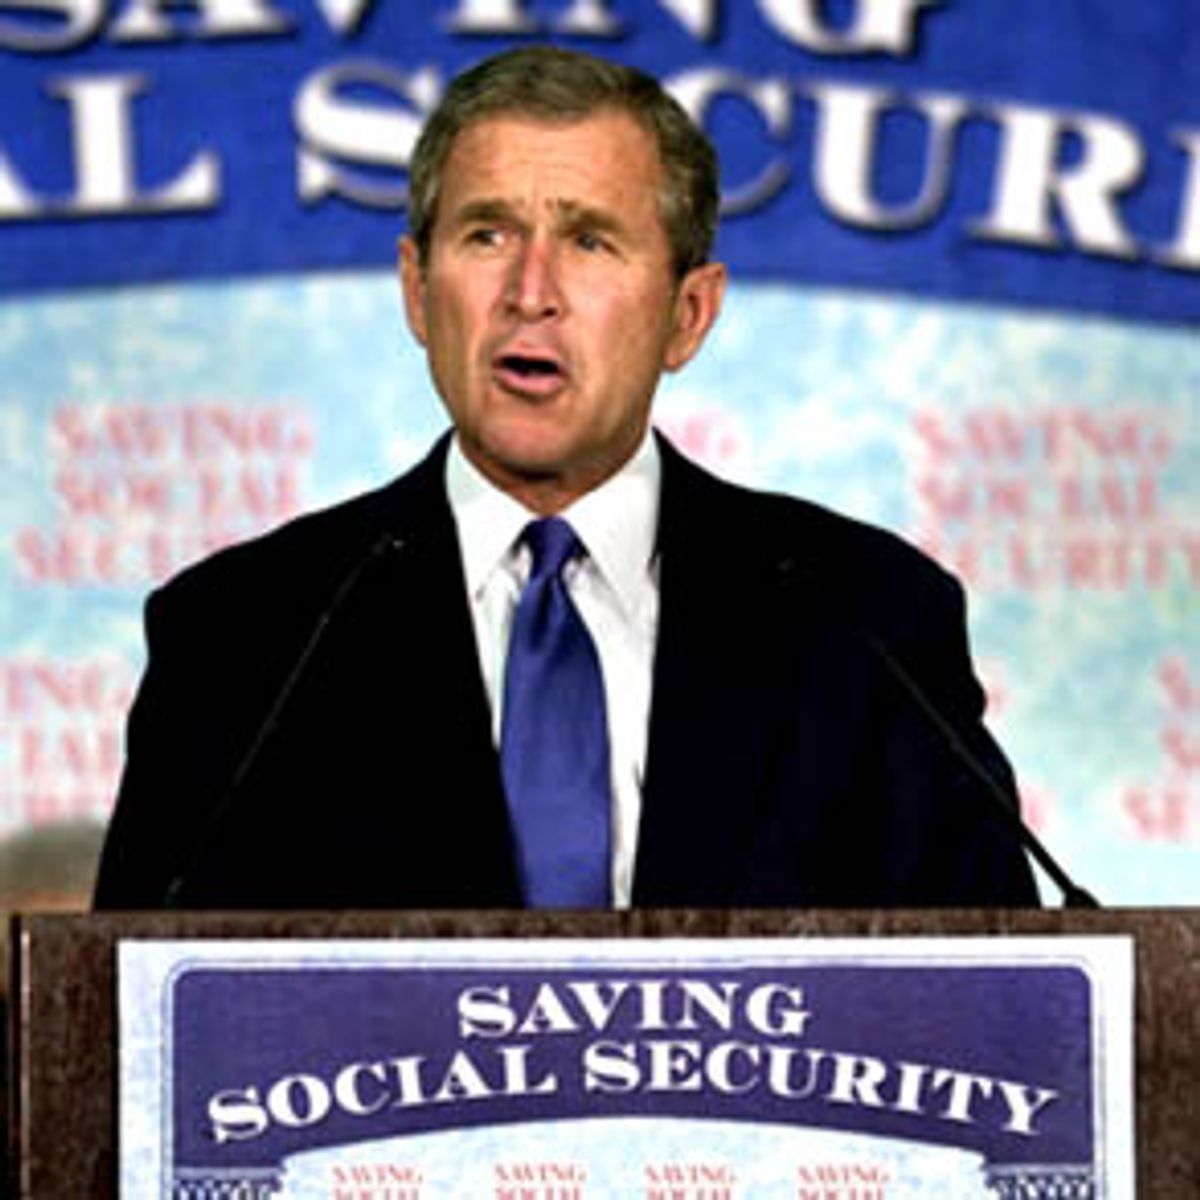 Republican presidential candidate Texas Gov. George W. Bush delivers a speech on Social Security at the Rancho Cucamonga Senior Center, in Rancho Cucamonga, Calif., Monday, May 15, 2000. Bush outlined a plan that would allow workers to invest part of their payroll taxes in private accounts. (AP Photo/Eric Draper) (Associated Press)